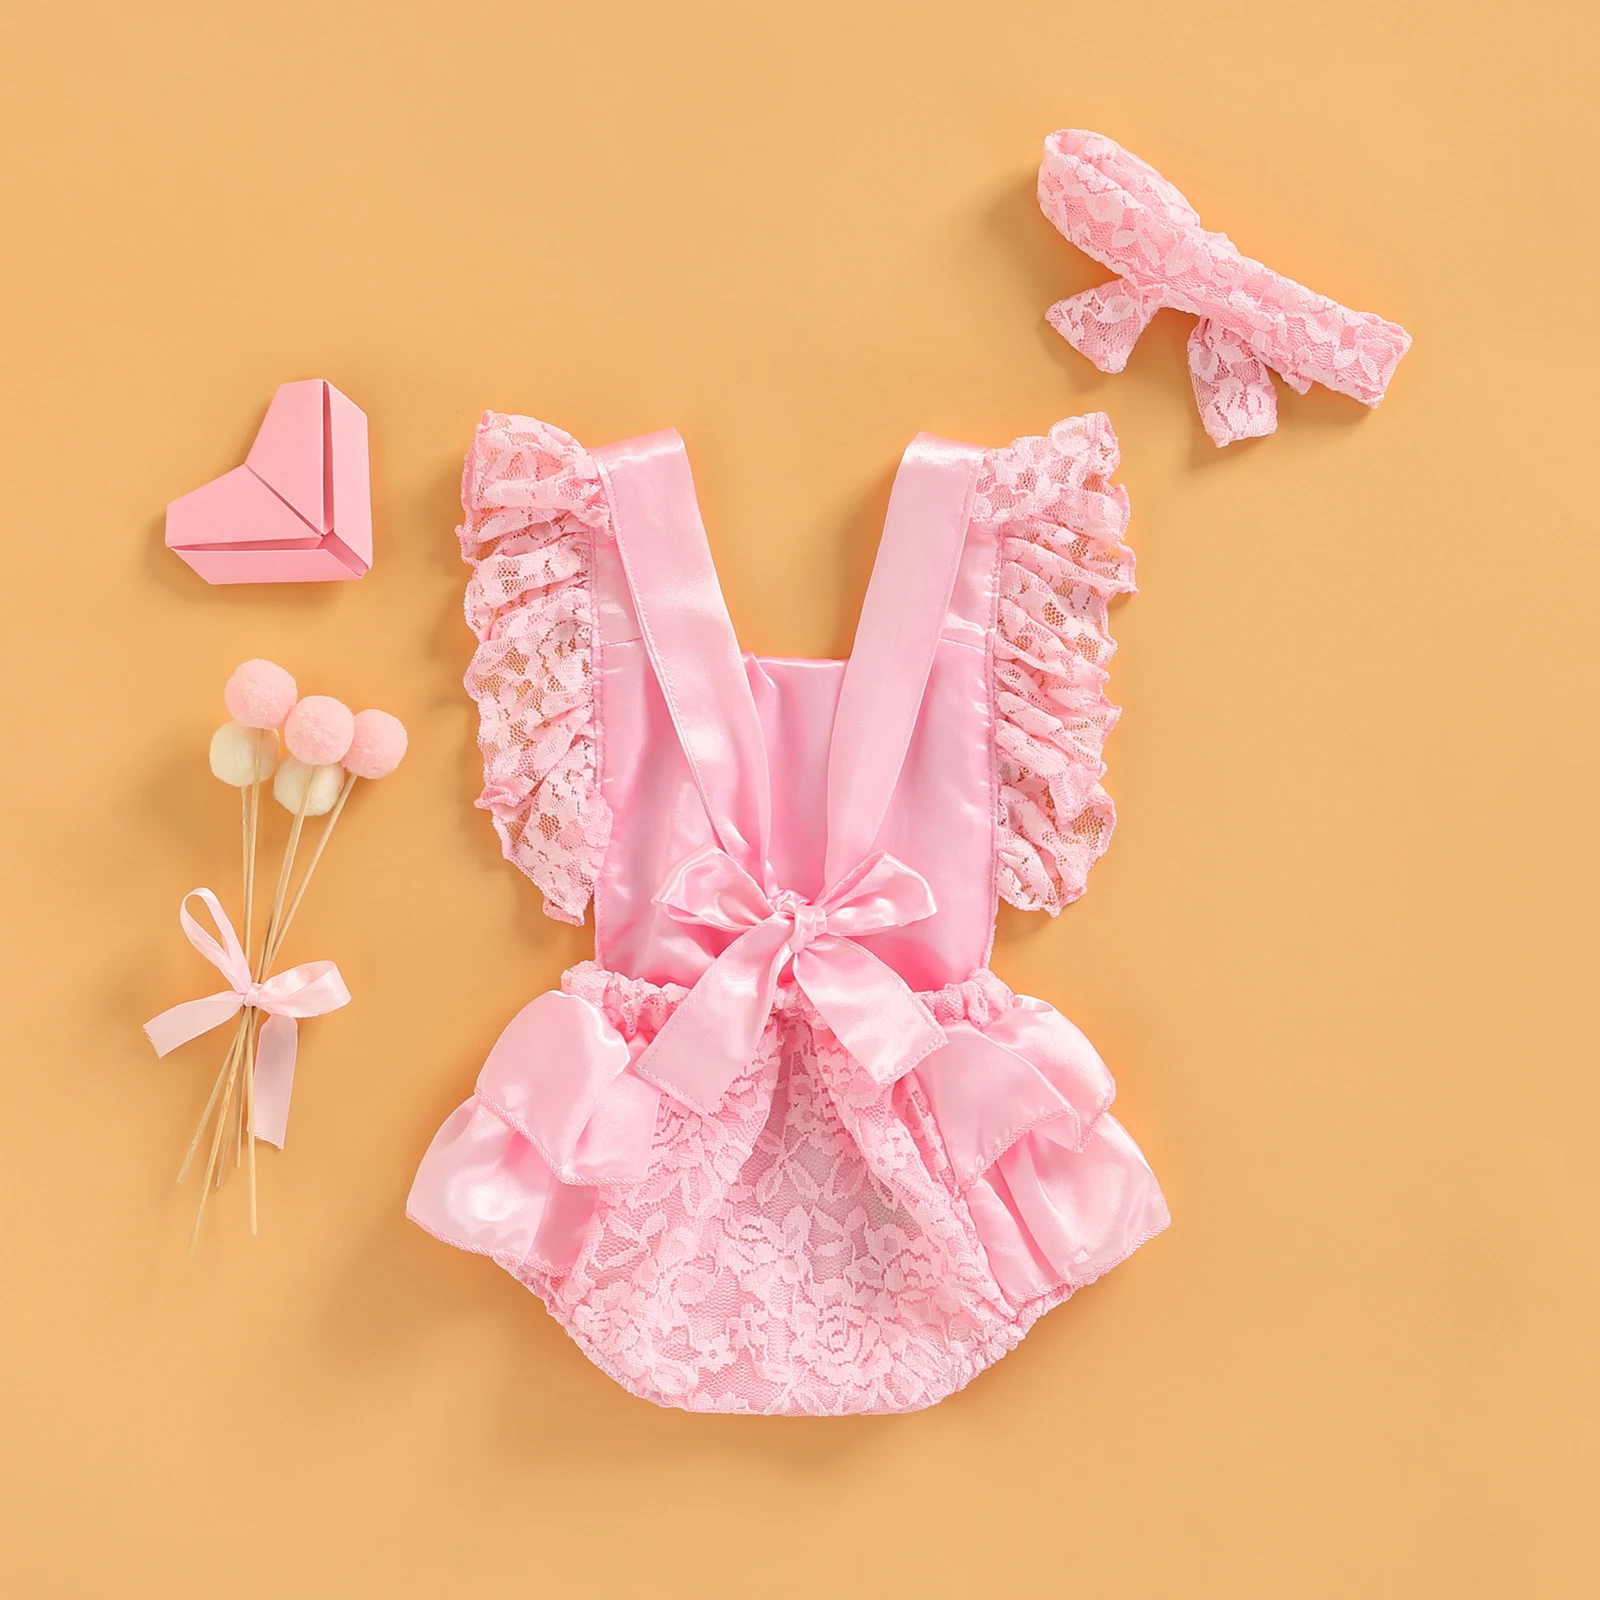 Ma&Baby 3-18M 1st Birthday Newborn Infant Baby Girls Romper Lace Ruffle Jumpsuit One Letter Overall Summer Clothing Costumes D01 customised baby bodysuits